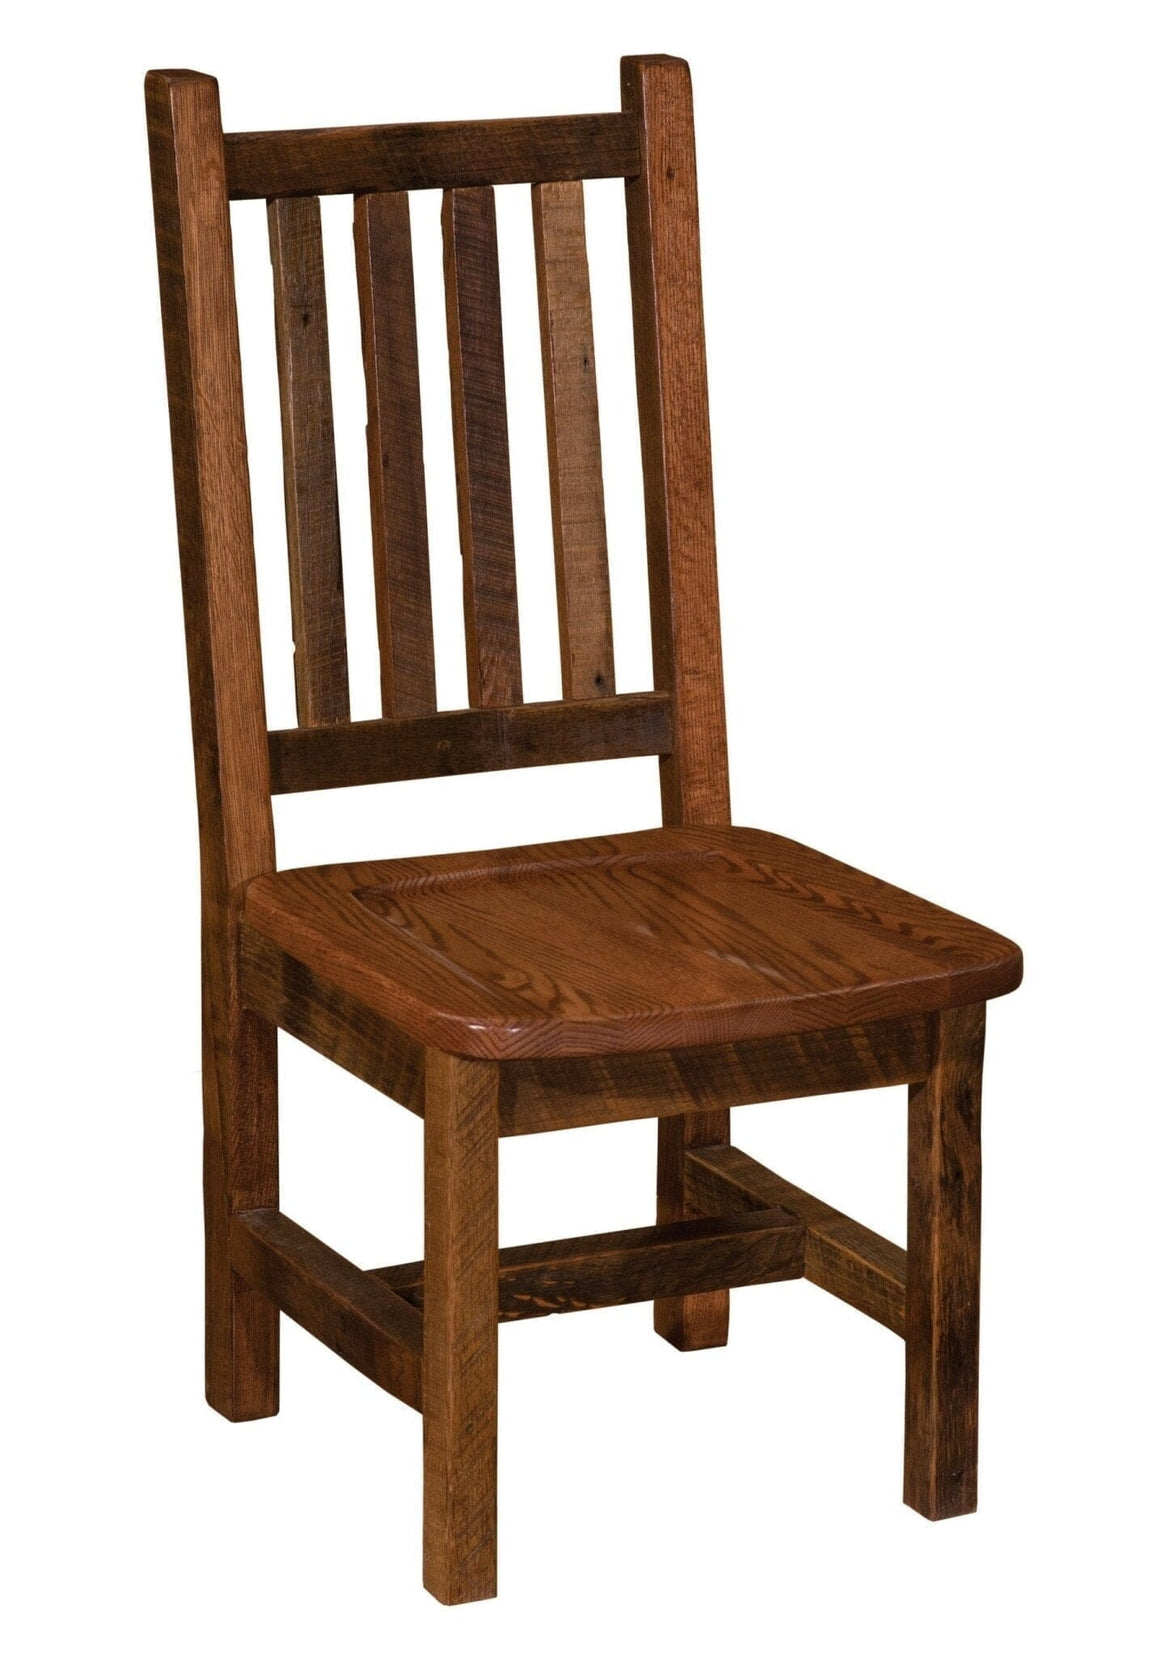 Barnwood Prairie Dining Side Chair - Antique Oak Seat - Rustic Deco Incorporated